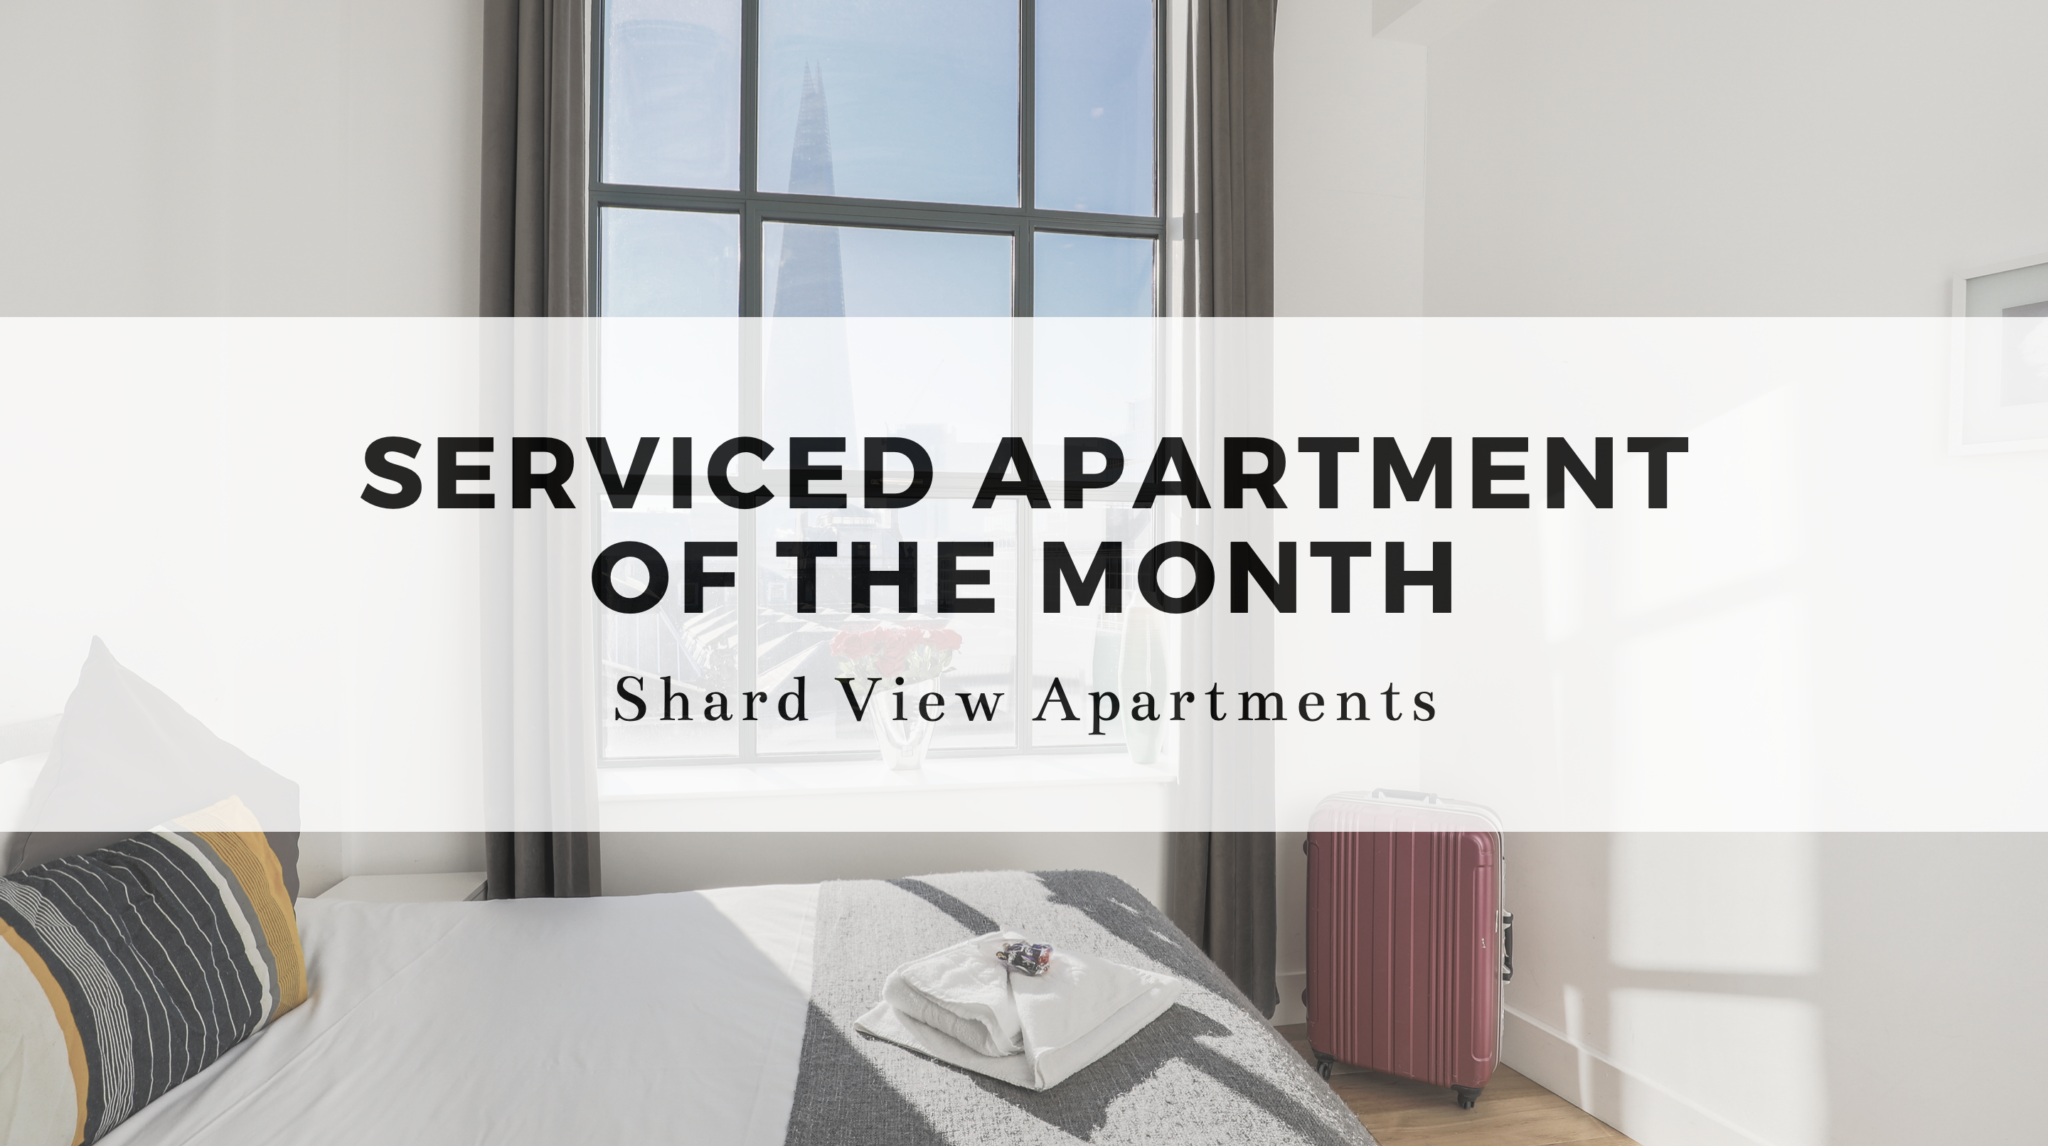 Have you seen our stunning Serviced Apartments? If not, we'll quickly introduce you to our Serviced Apartment of the Month - Shard View Apartments.